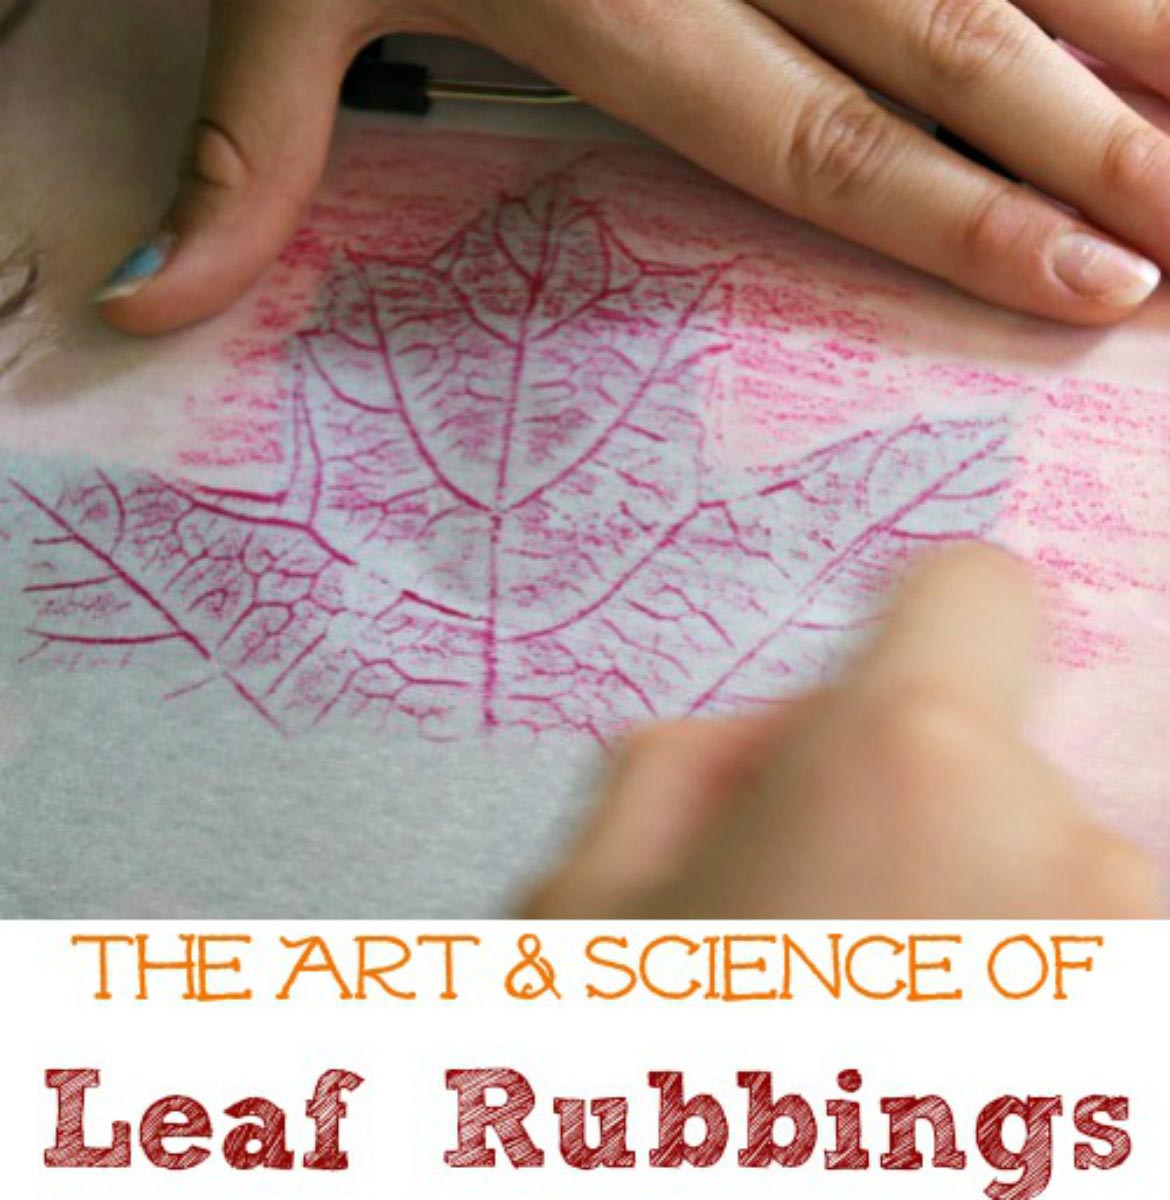 fall crafts for kids: how to make leaf rubbings